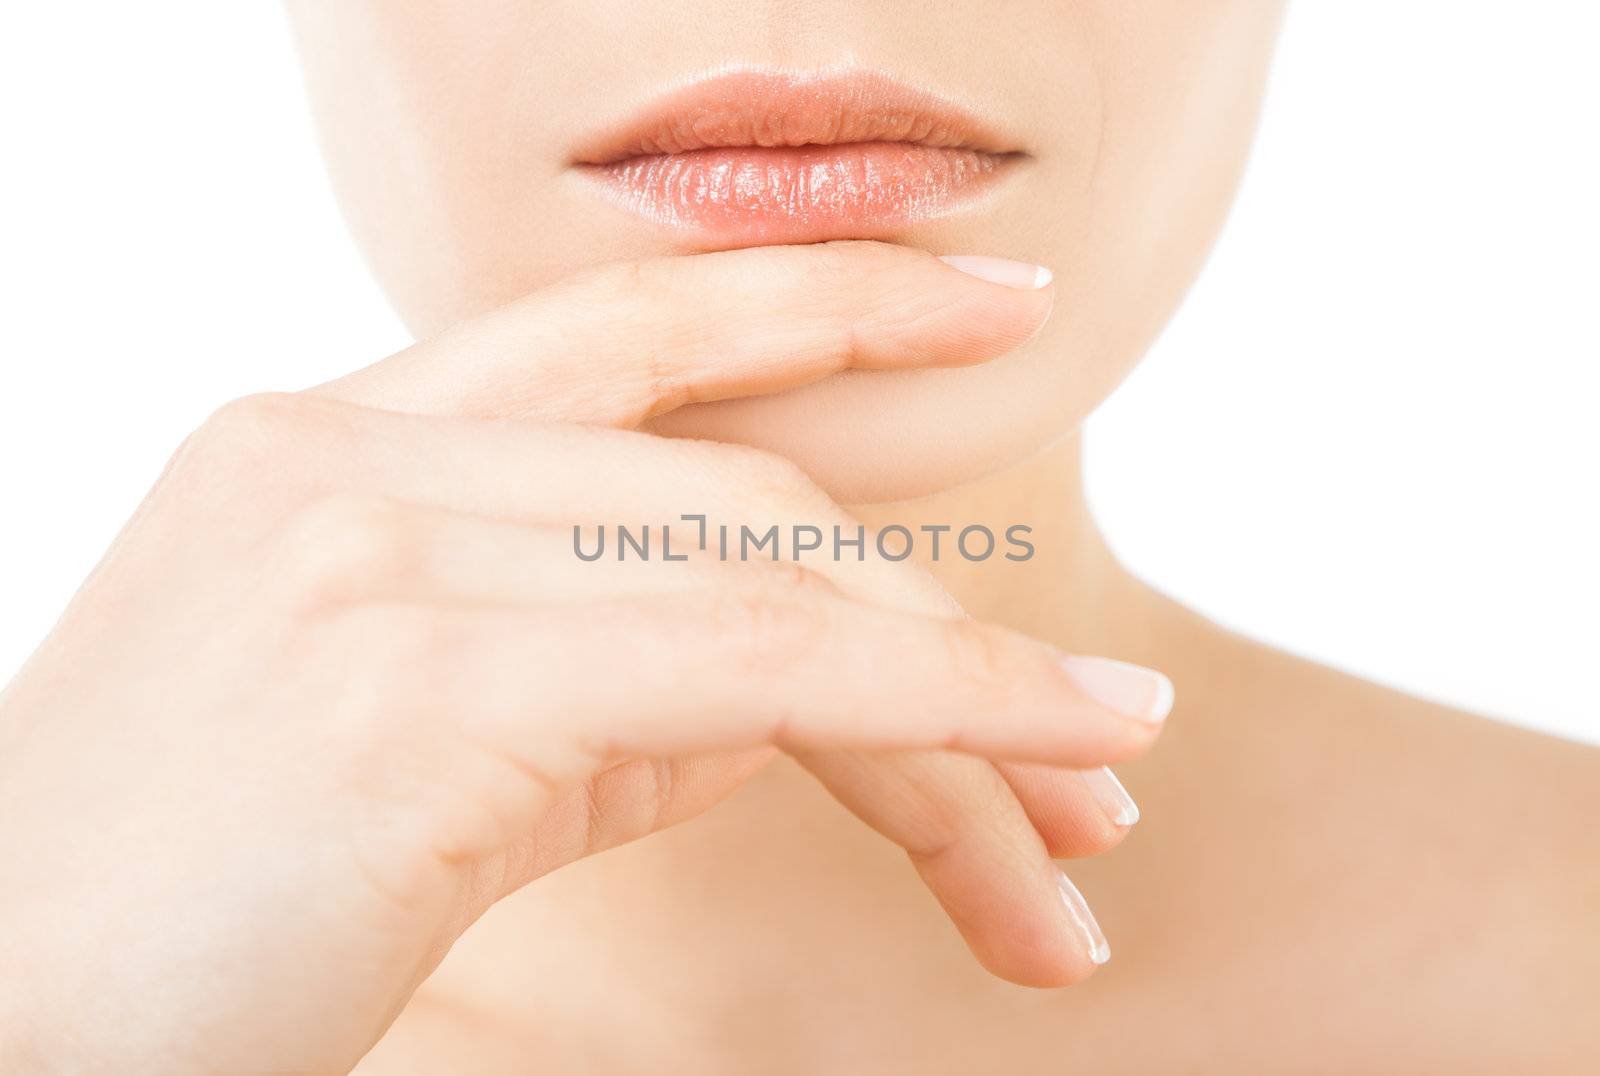 Close-up of beautiful female lips and hand on chin